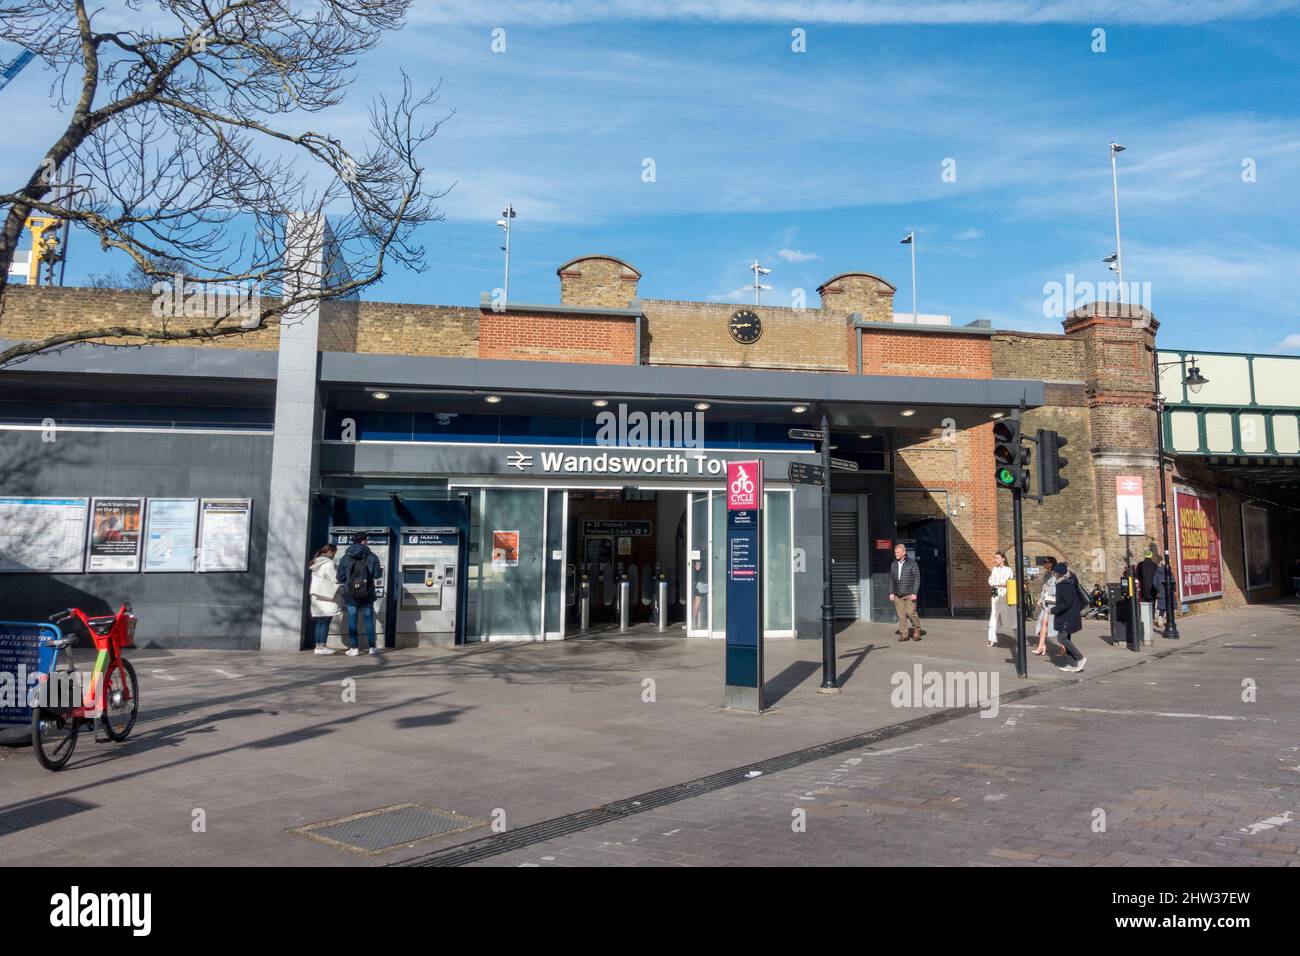 Entrance to Wandsworth Town South Western Railway station on Old York Road in Battersea, Wandsworth, London, UK. Stock Photo